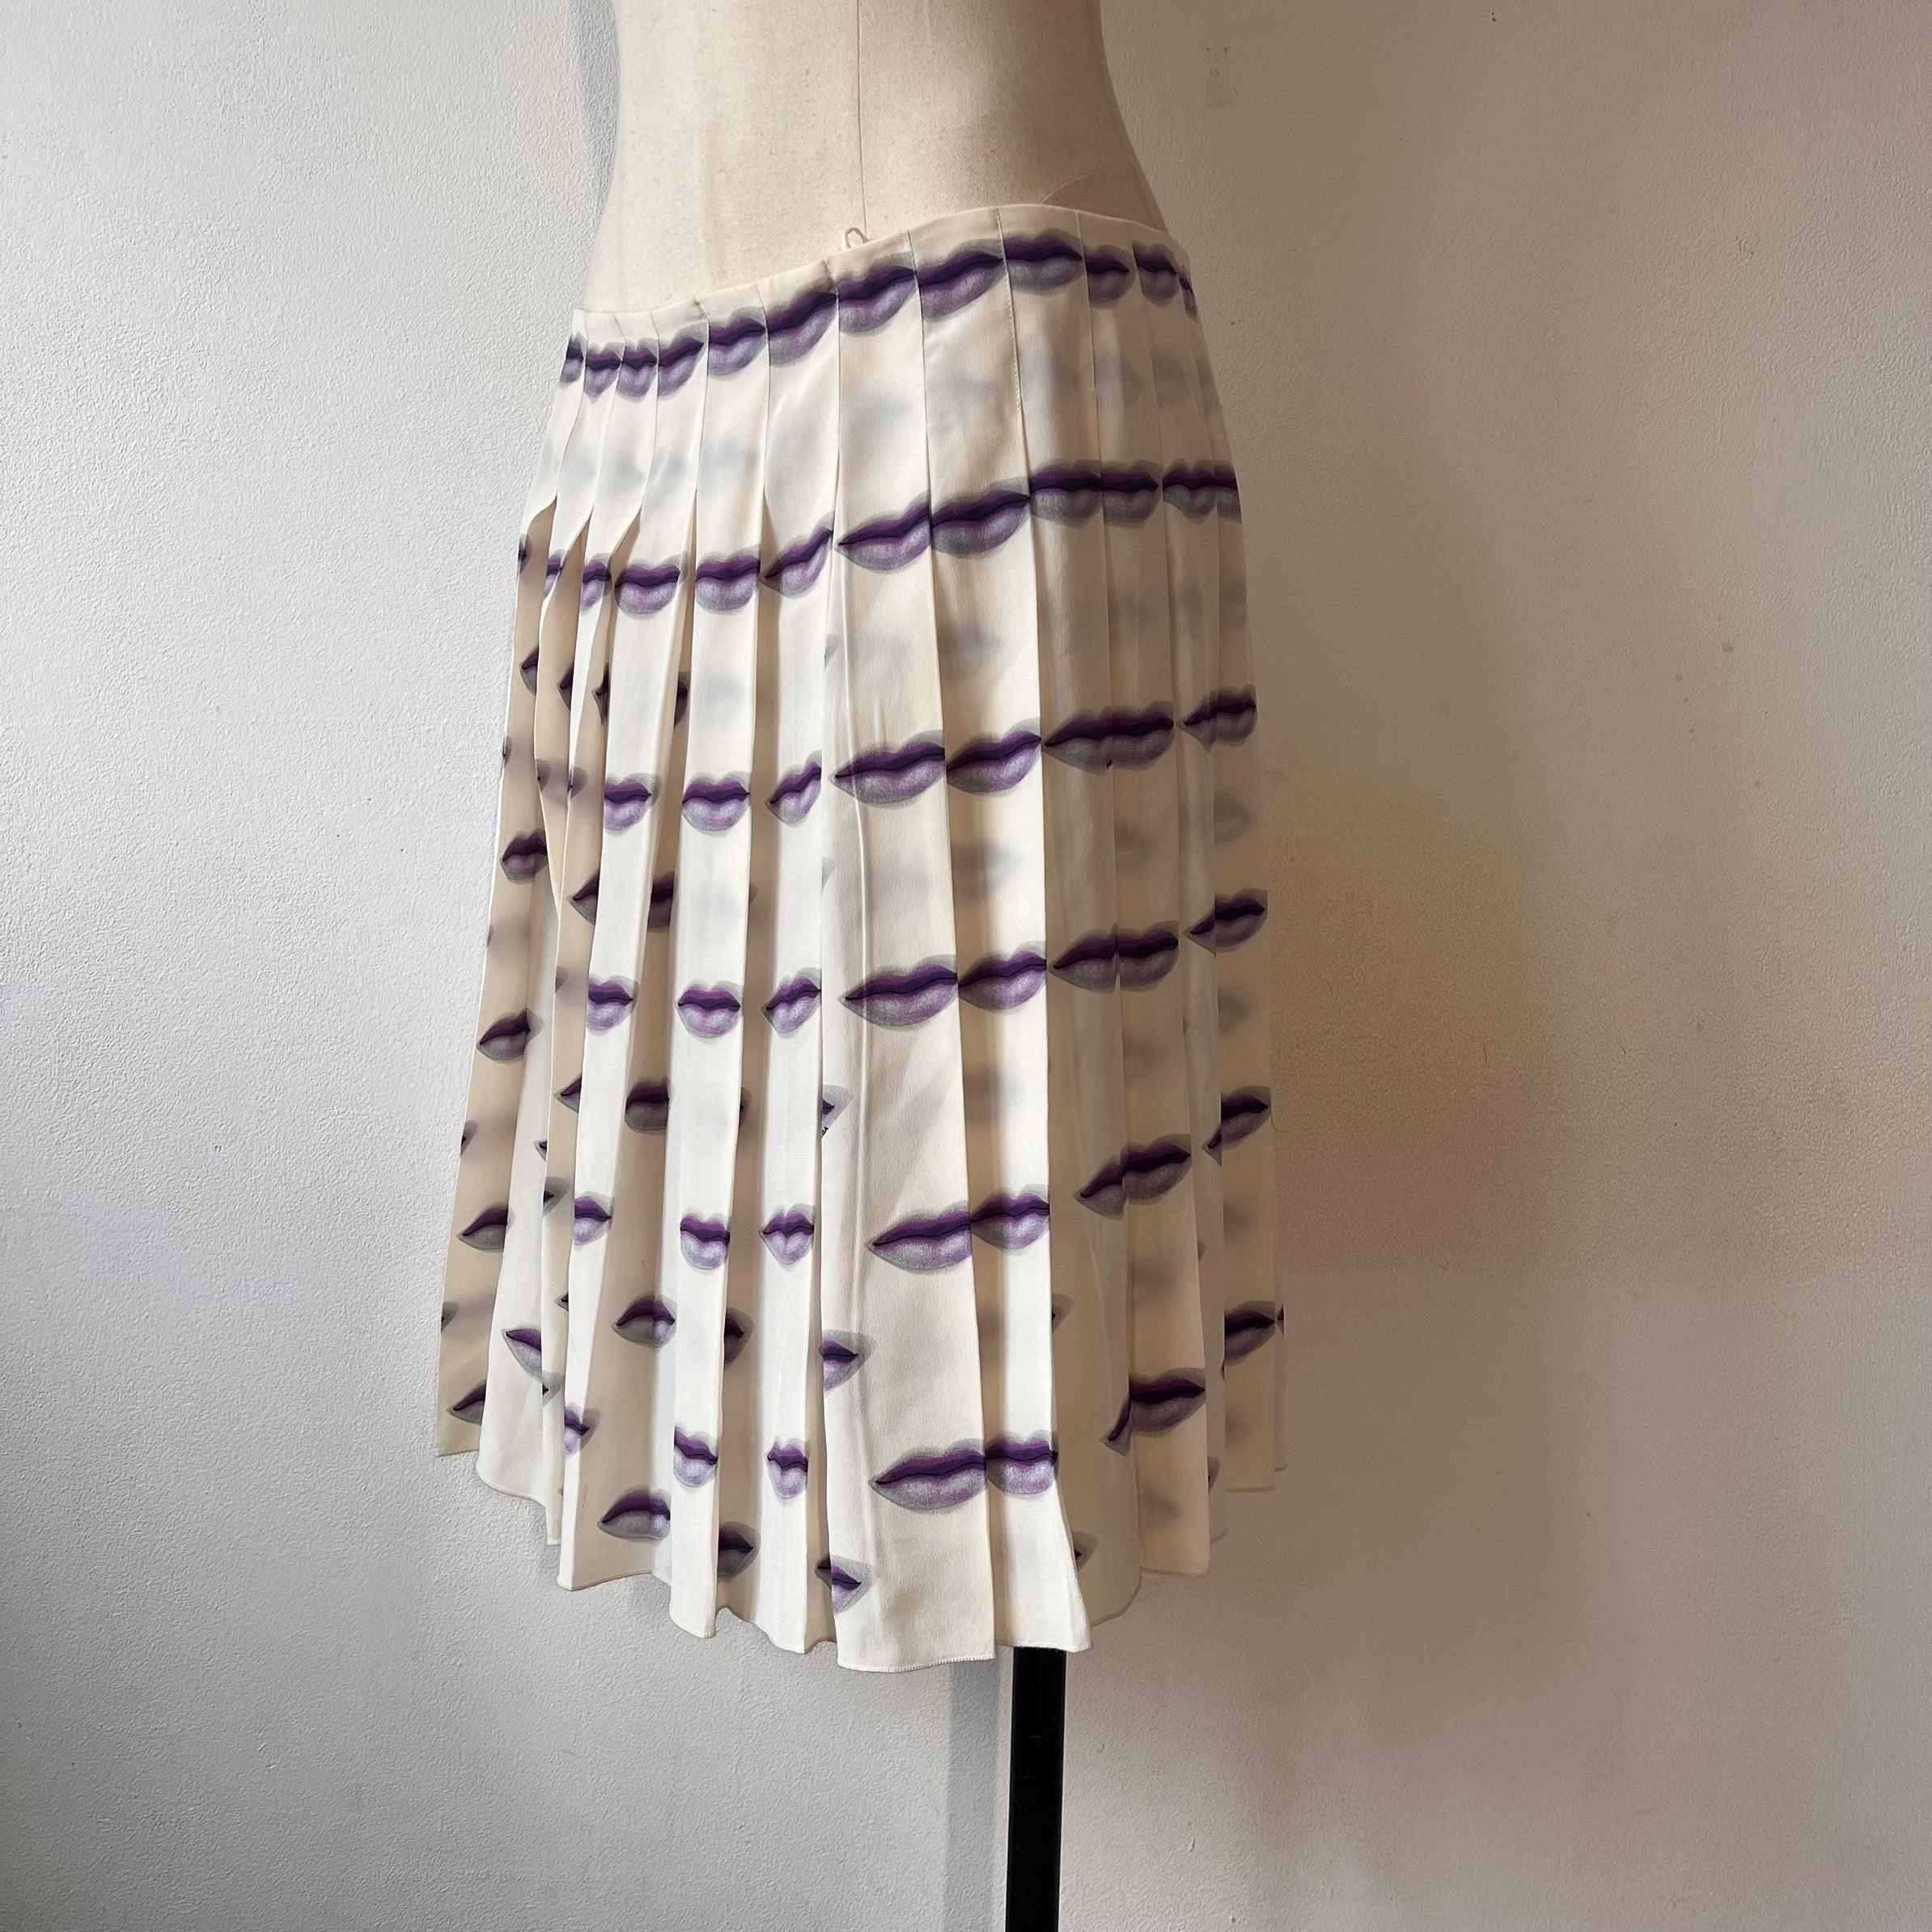 One of the most iconic pieces of the Prada 2000 s/s collection is this vintage skirt that  took inspiration from classics like Chanel and Schiaparelli. The skirt is 100% silk and features purple lips all around. The printing show cases the fine line